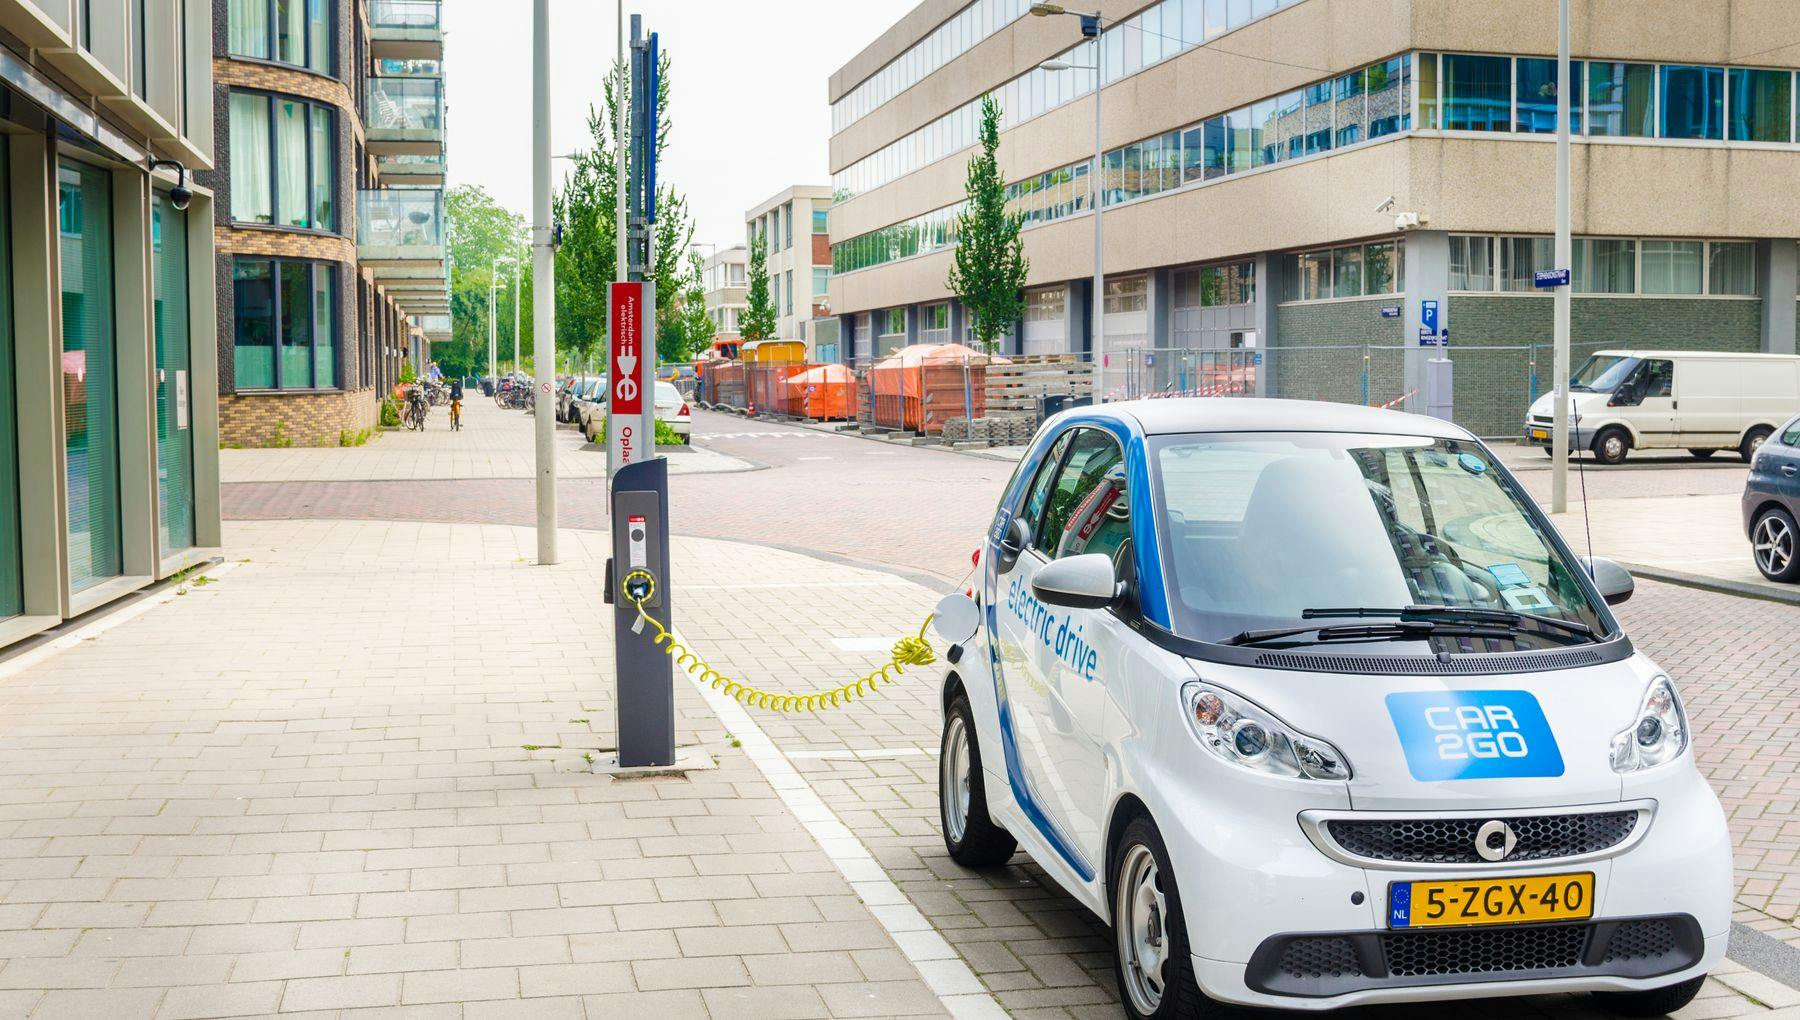 Amsterdam, The Netherlands - June 12, 2016: Car2Go Electric Car being Charged. Car2go is carsharing service available in Europe and North America. The Cars are user-accessed via a smartphone app